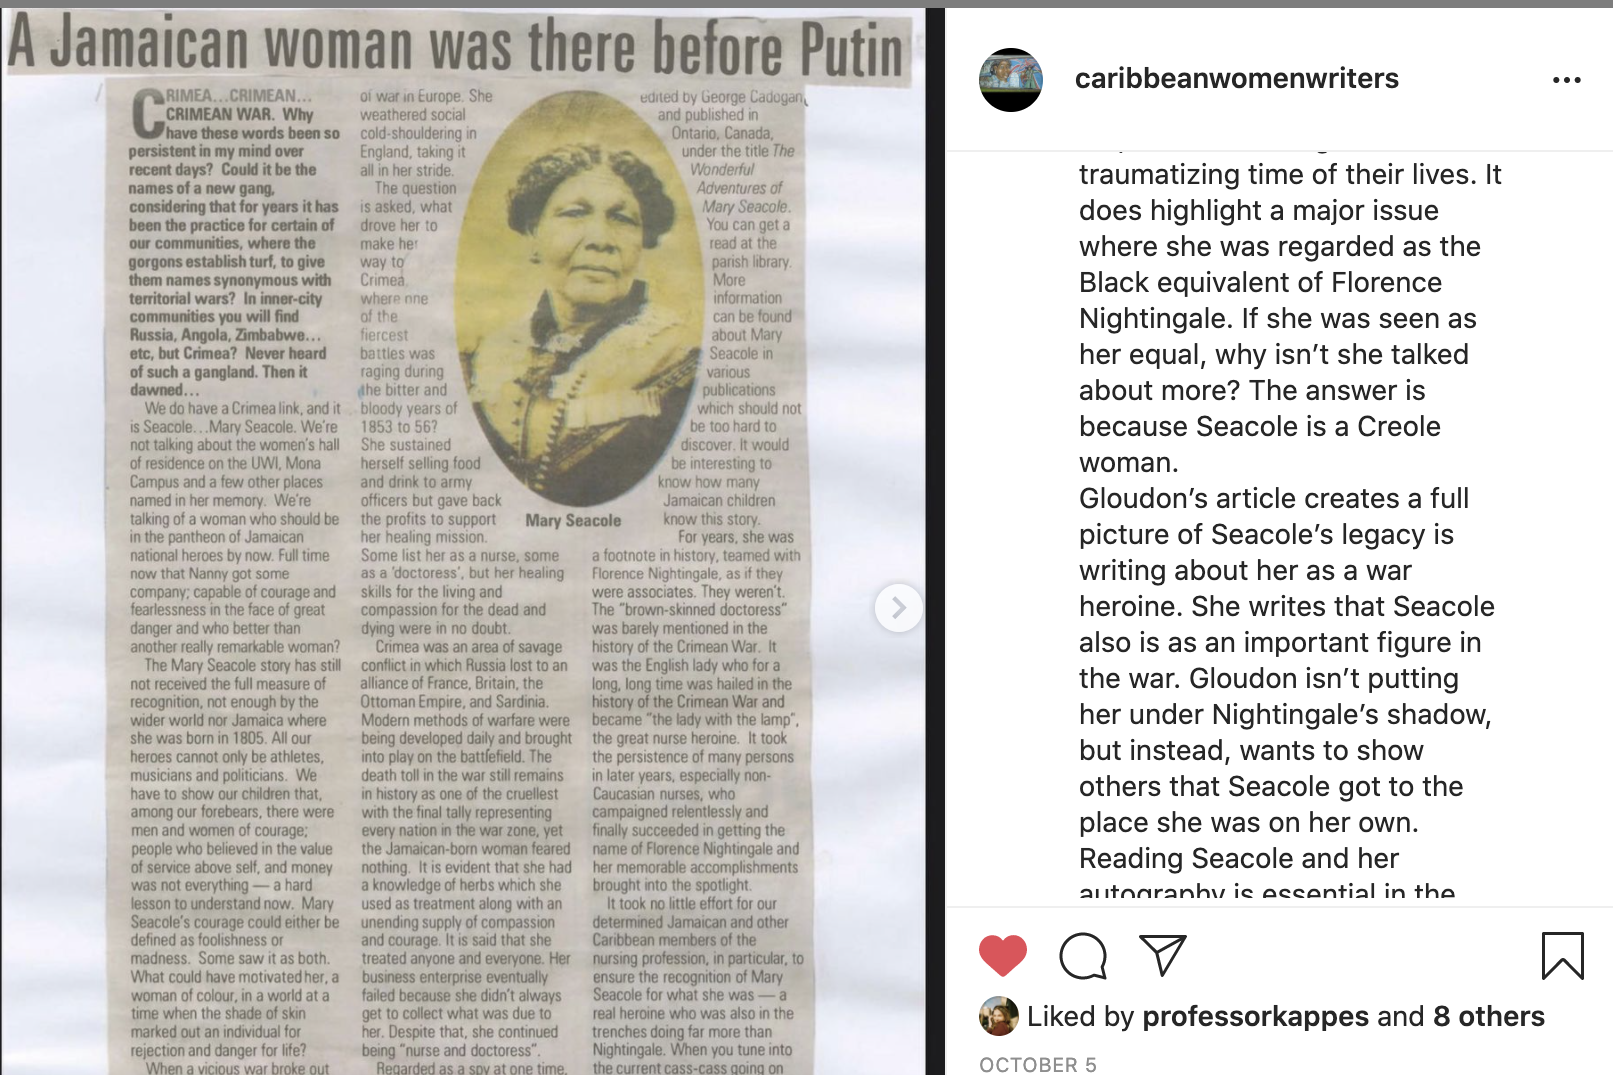 Fig. 2. Screenshot of student Instagram post of The Daily Observer article, “A Jamaican woman was there before Putin.” On the left is an image of a newspaper article featuring a photo of Mary Seacole. On the right is the account name (@caribbeanwomenwriters), a student-written caption, and text that signifies that the post has been “Liked by professorkappes and 8 others.”